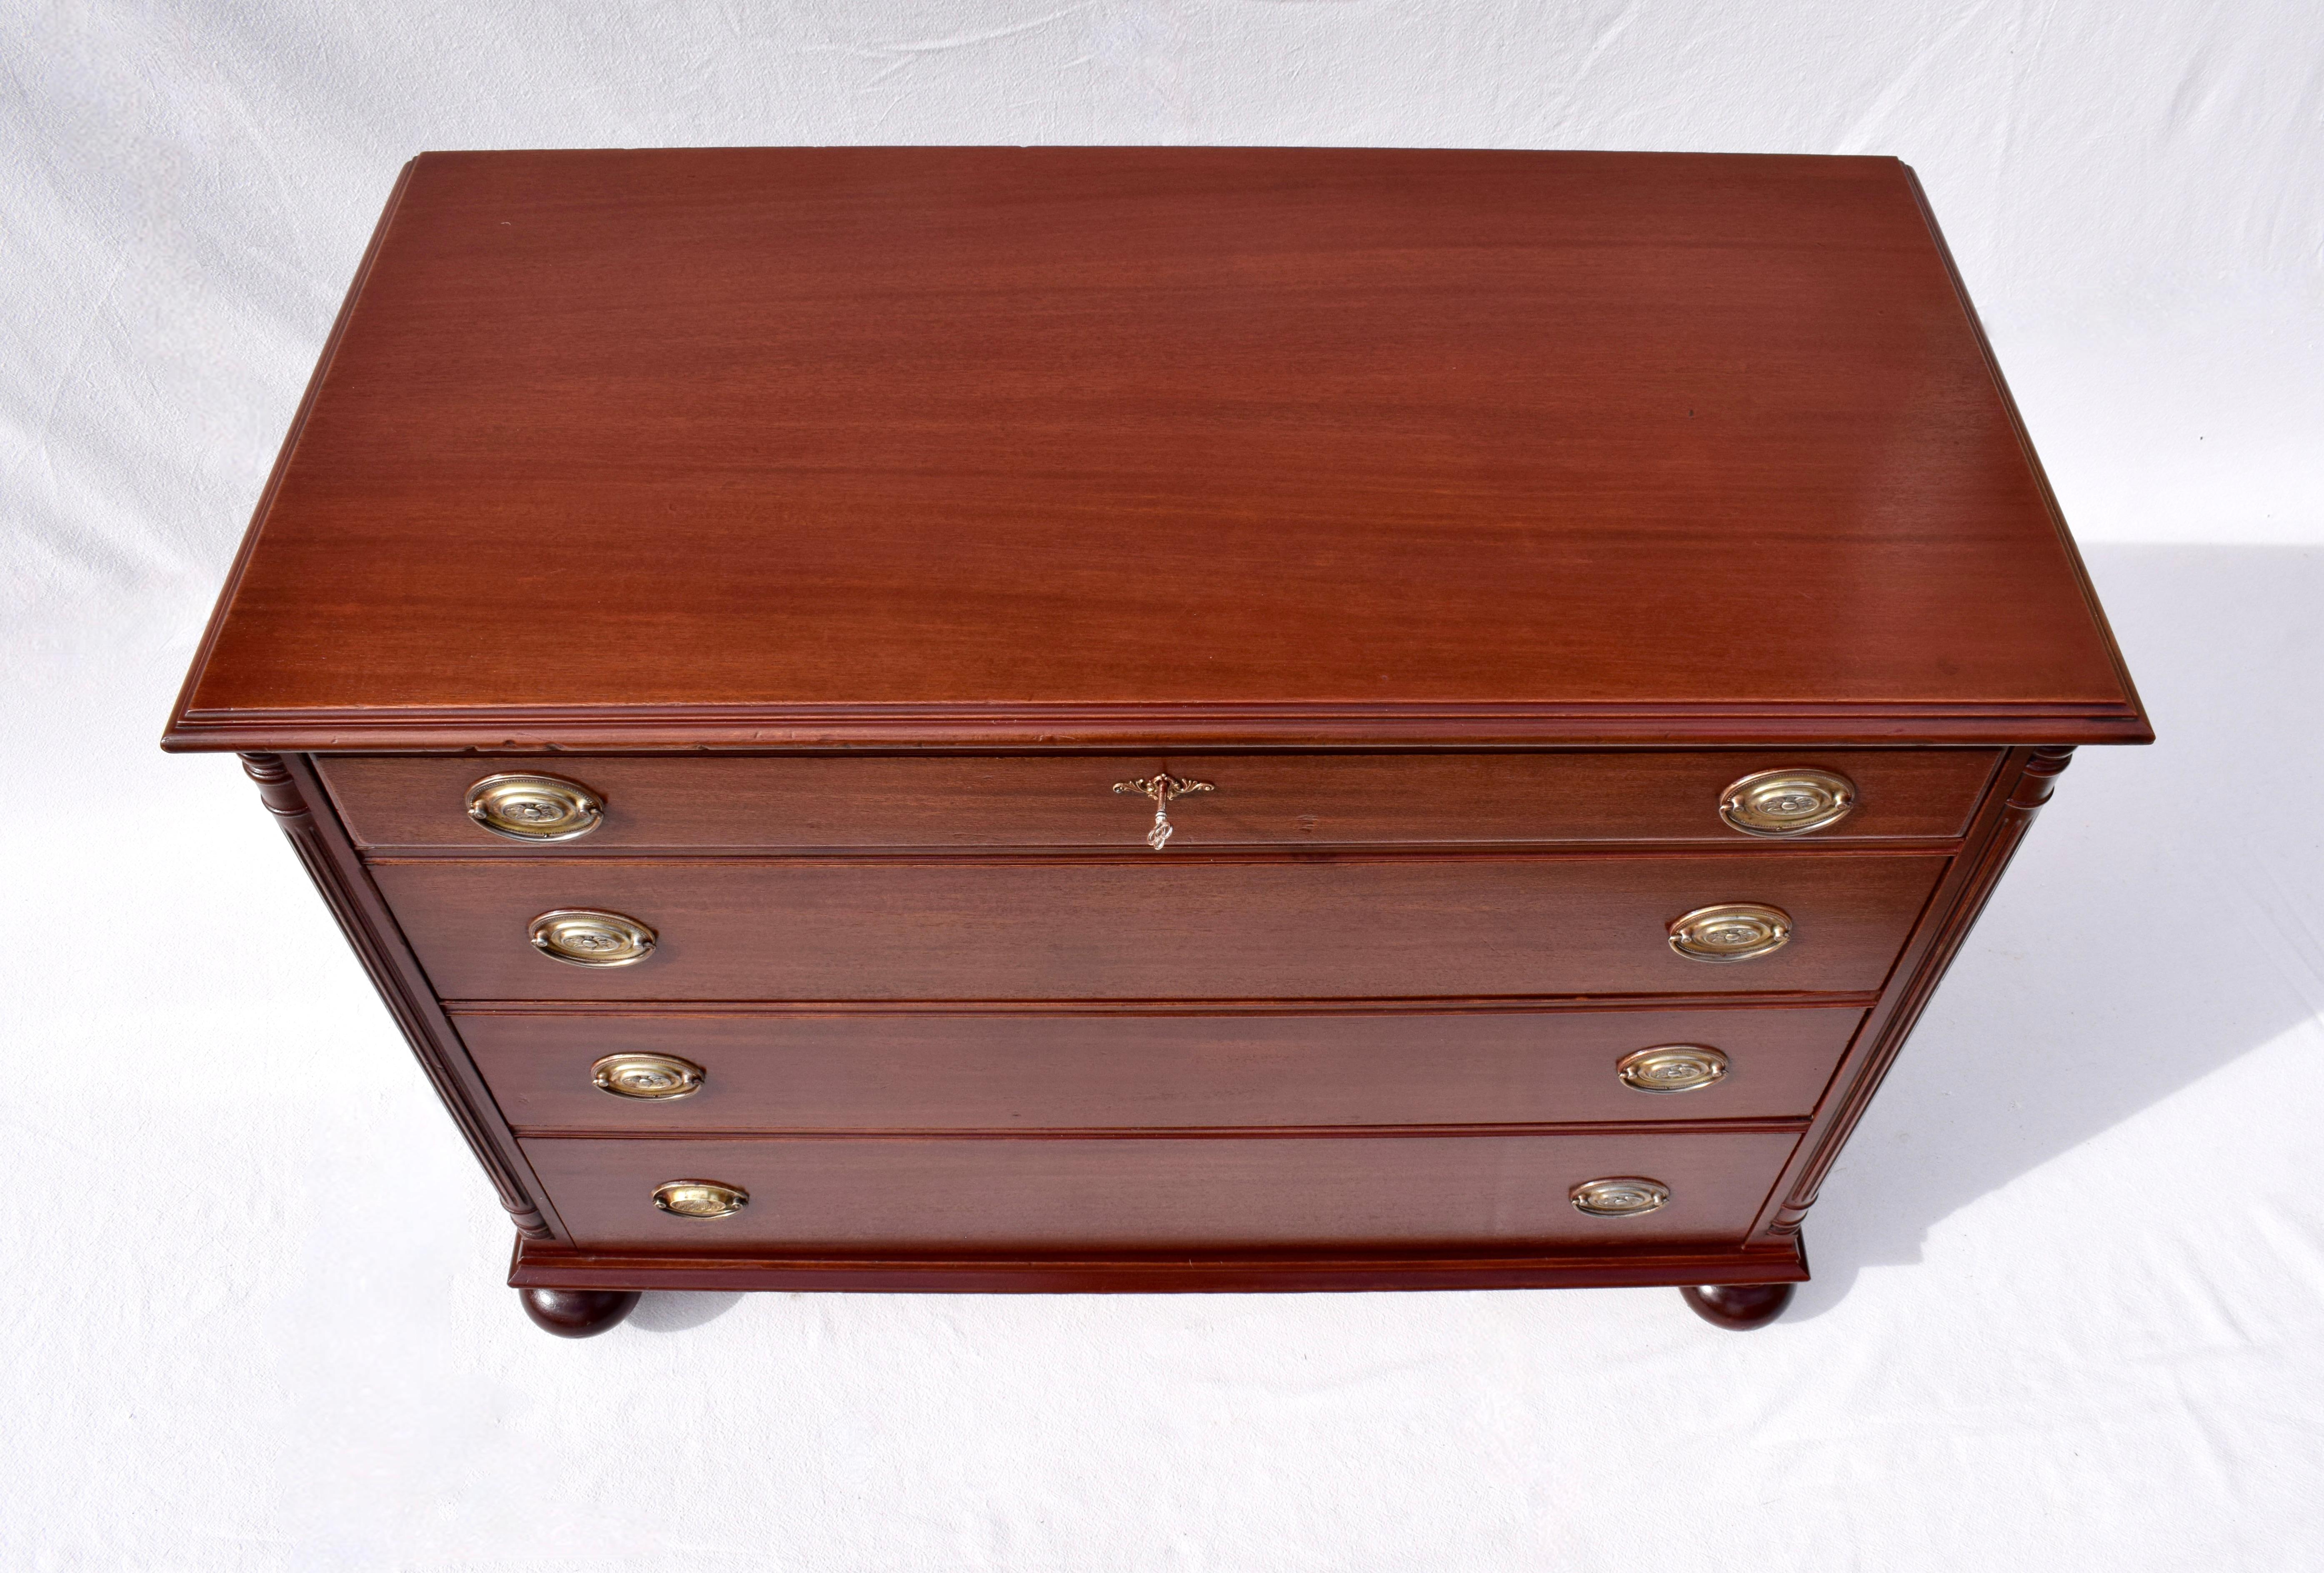 An impressive Mahogany chest of four drawers with working lock & key and marvelous cannonball feet on casters. Newly refinished; generous storage, ready for use.